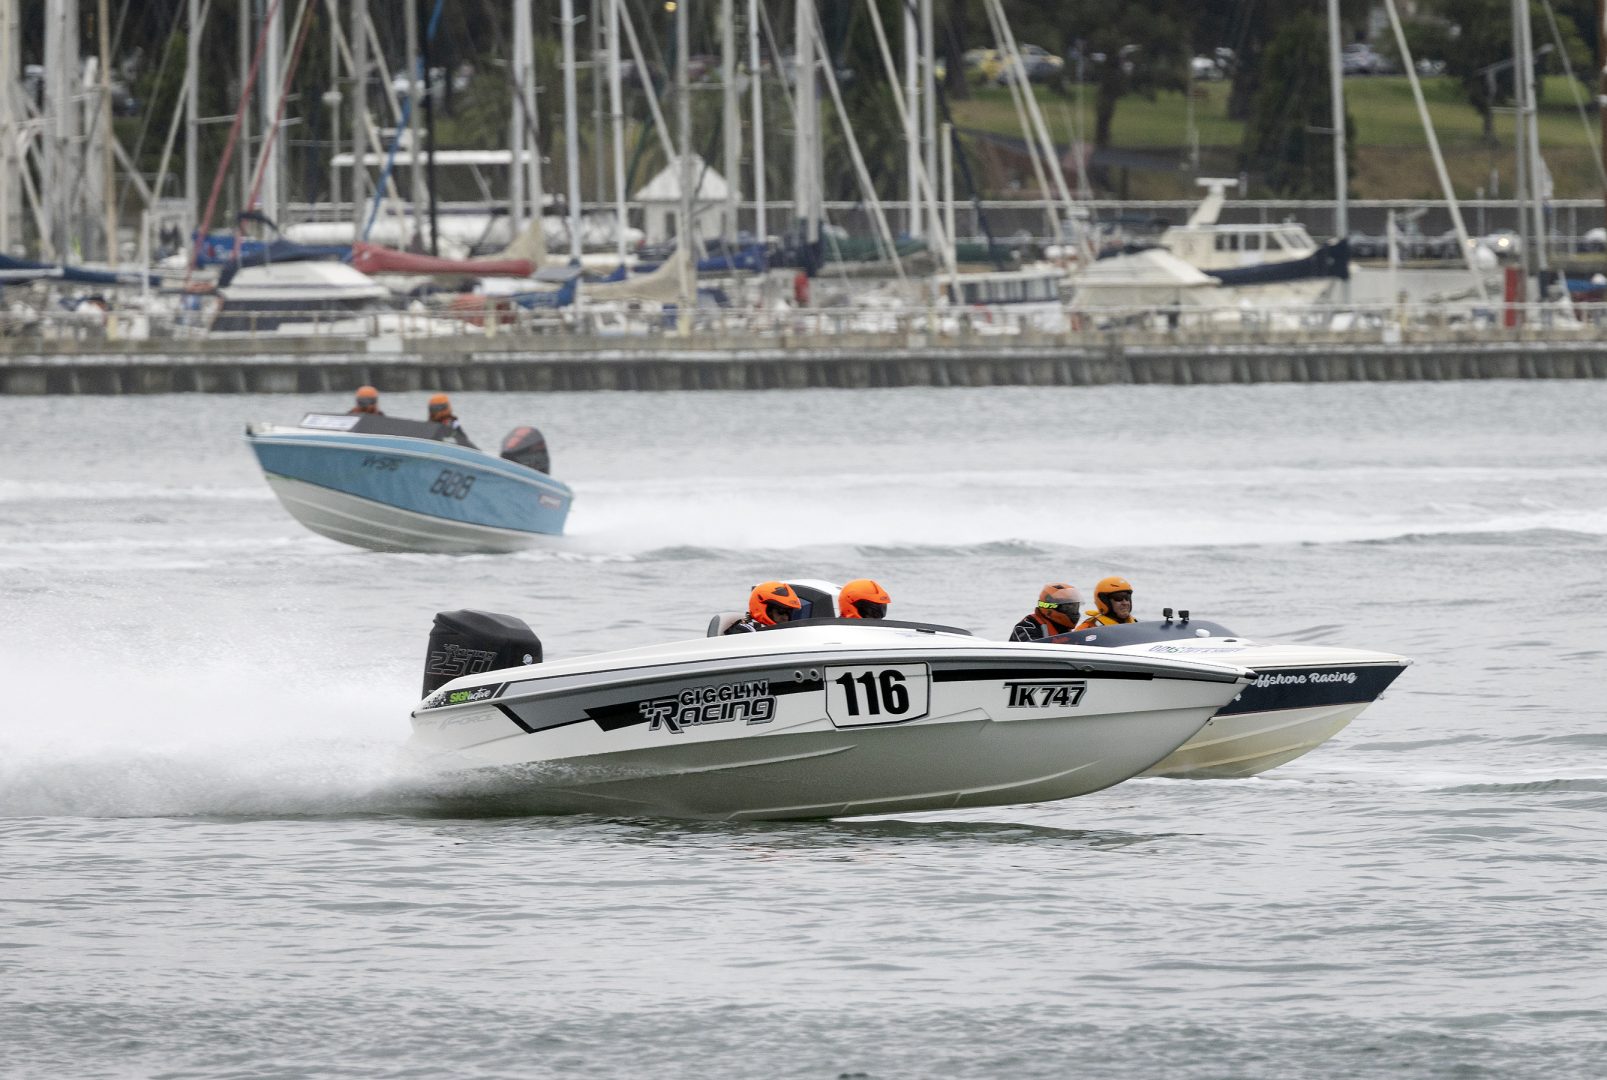 The Superboats are coming!